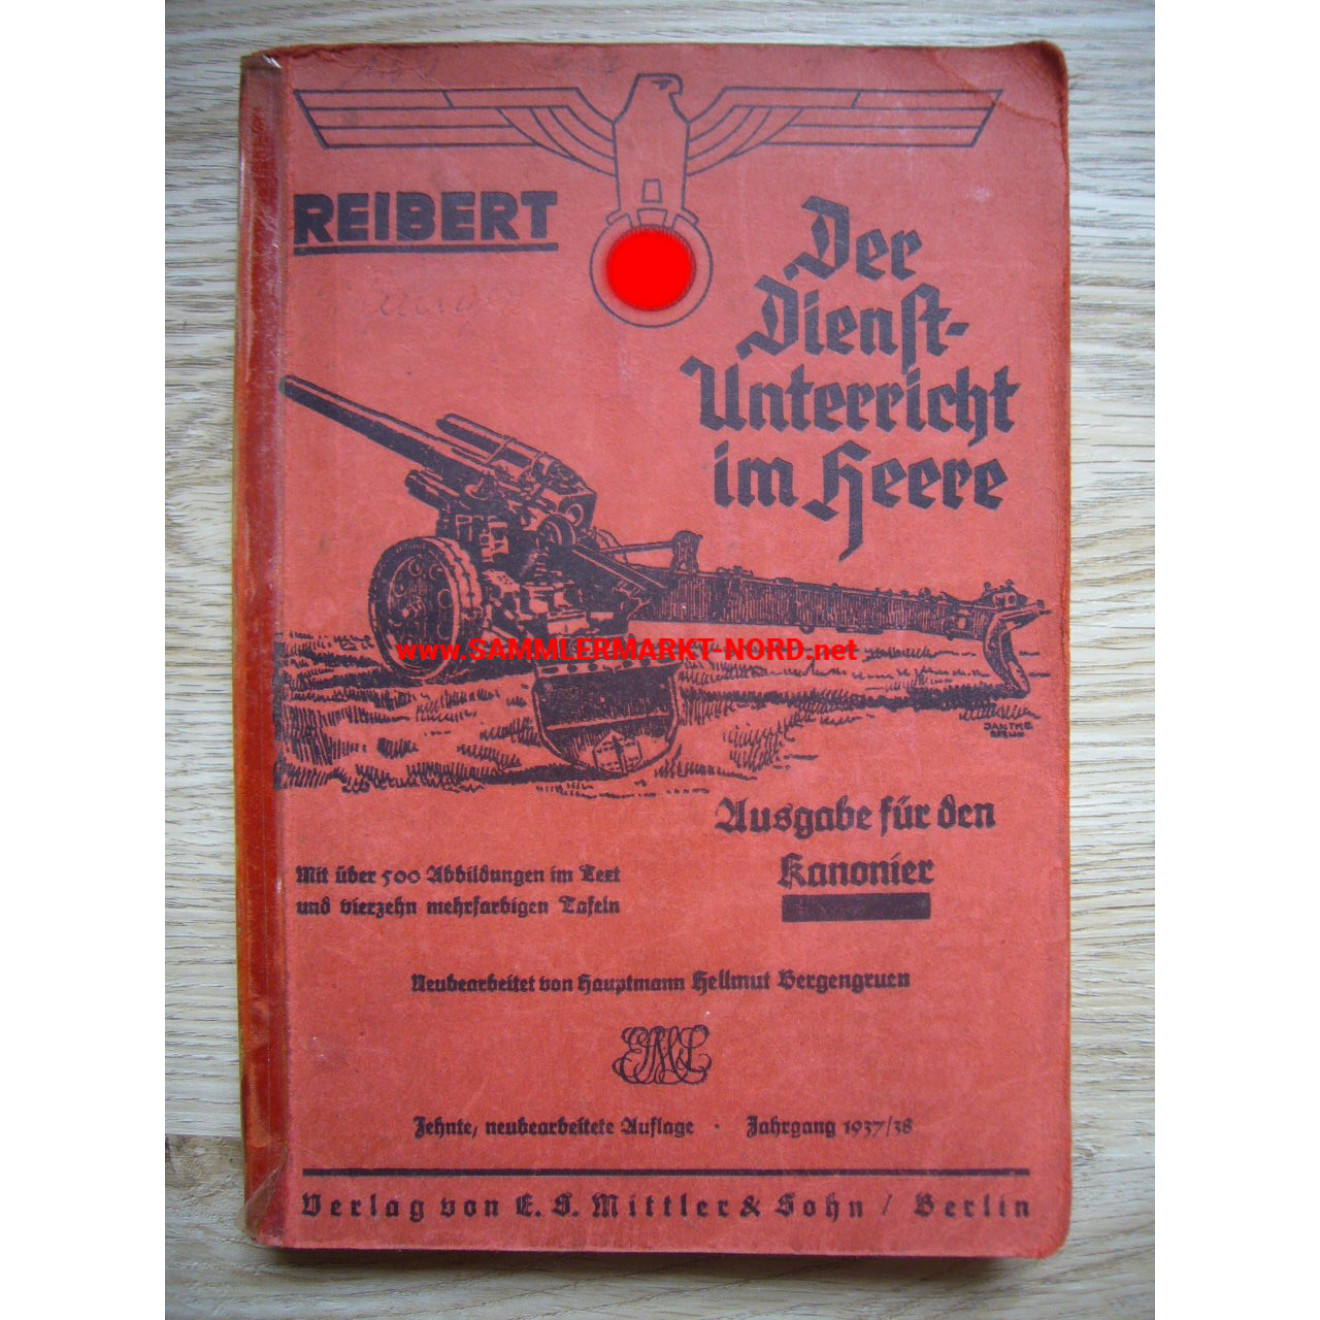 Reibert - The Service Lesson in the Army - Edition for the Gunner 1937/38